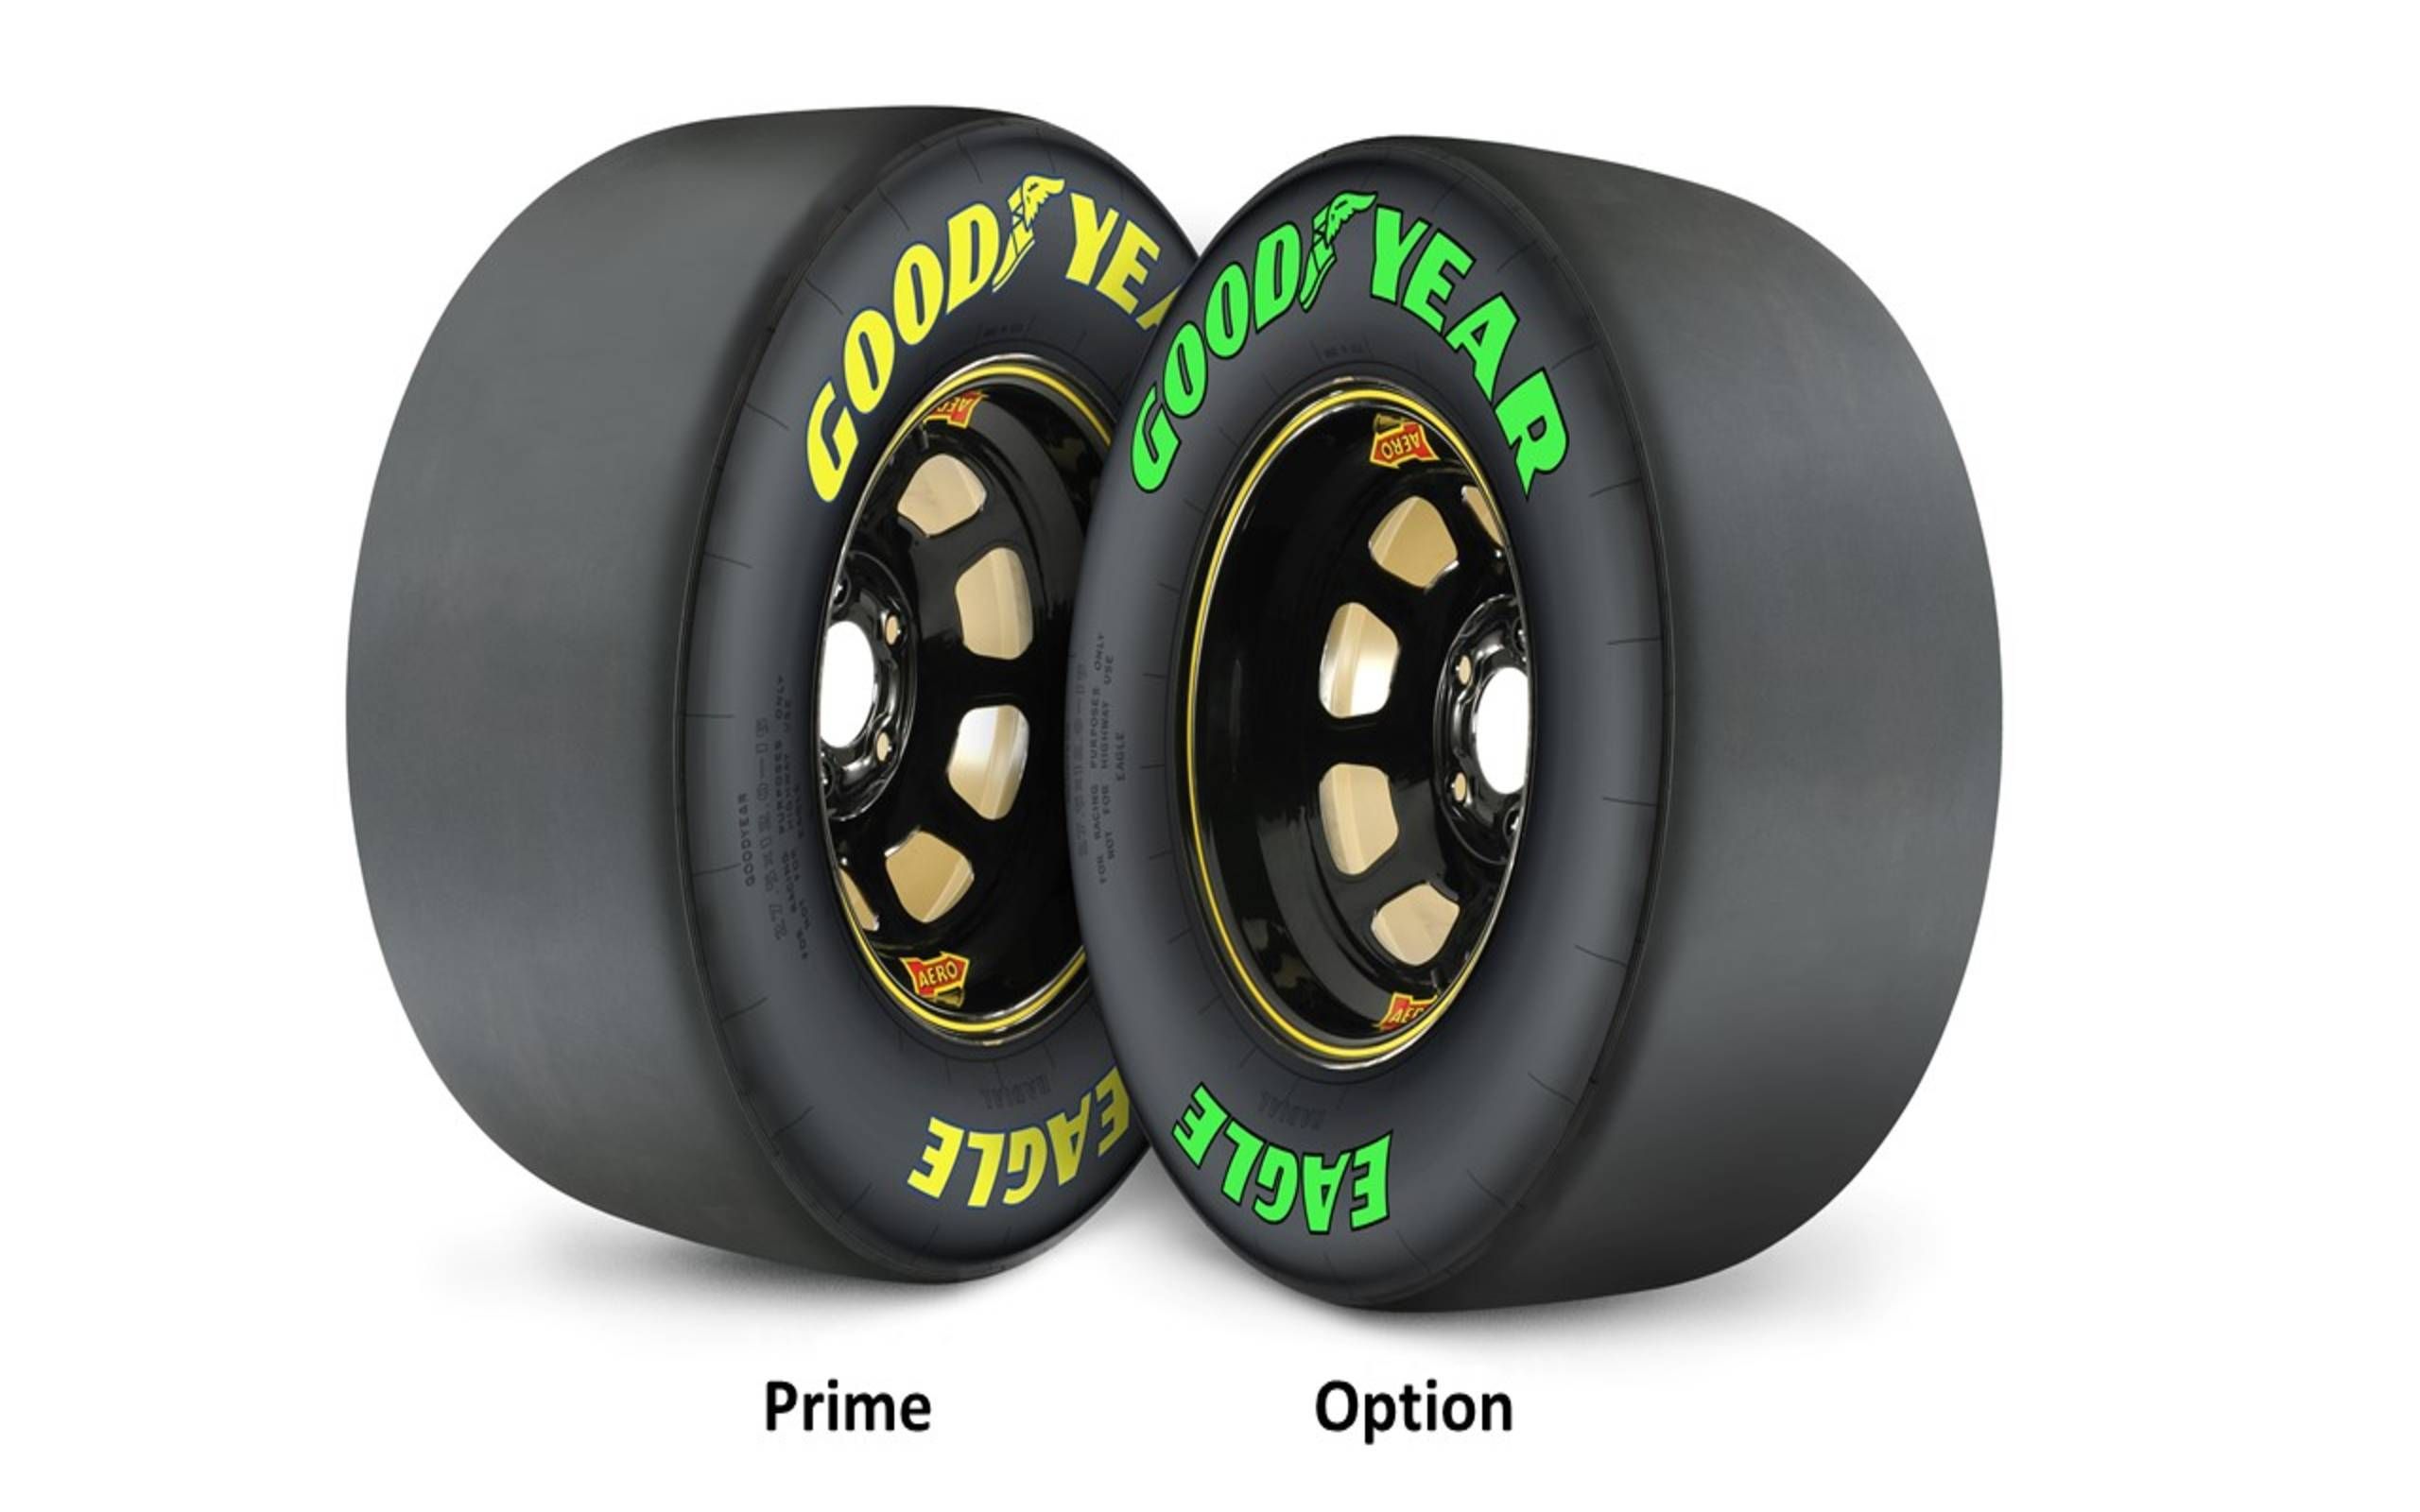 Goodyear executive says option tires are 'absolutely doable' for NASCAR  regular season